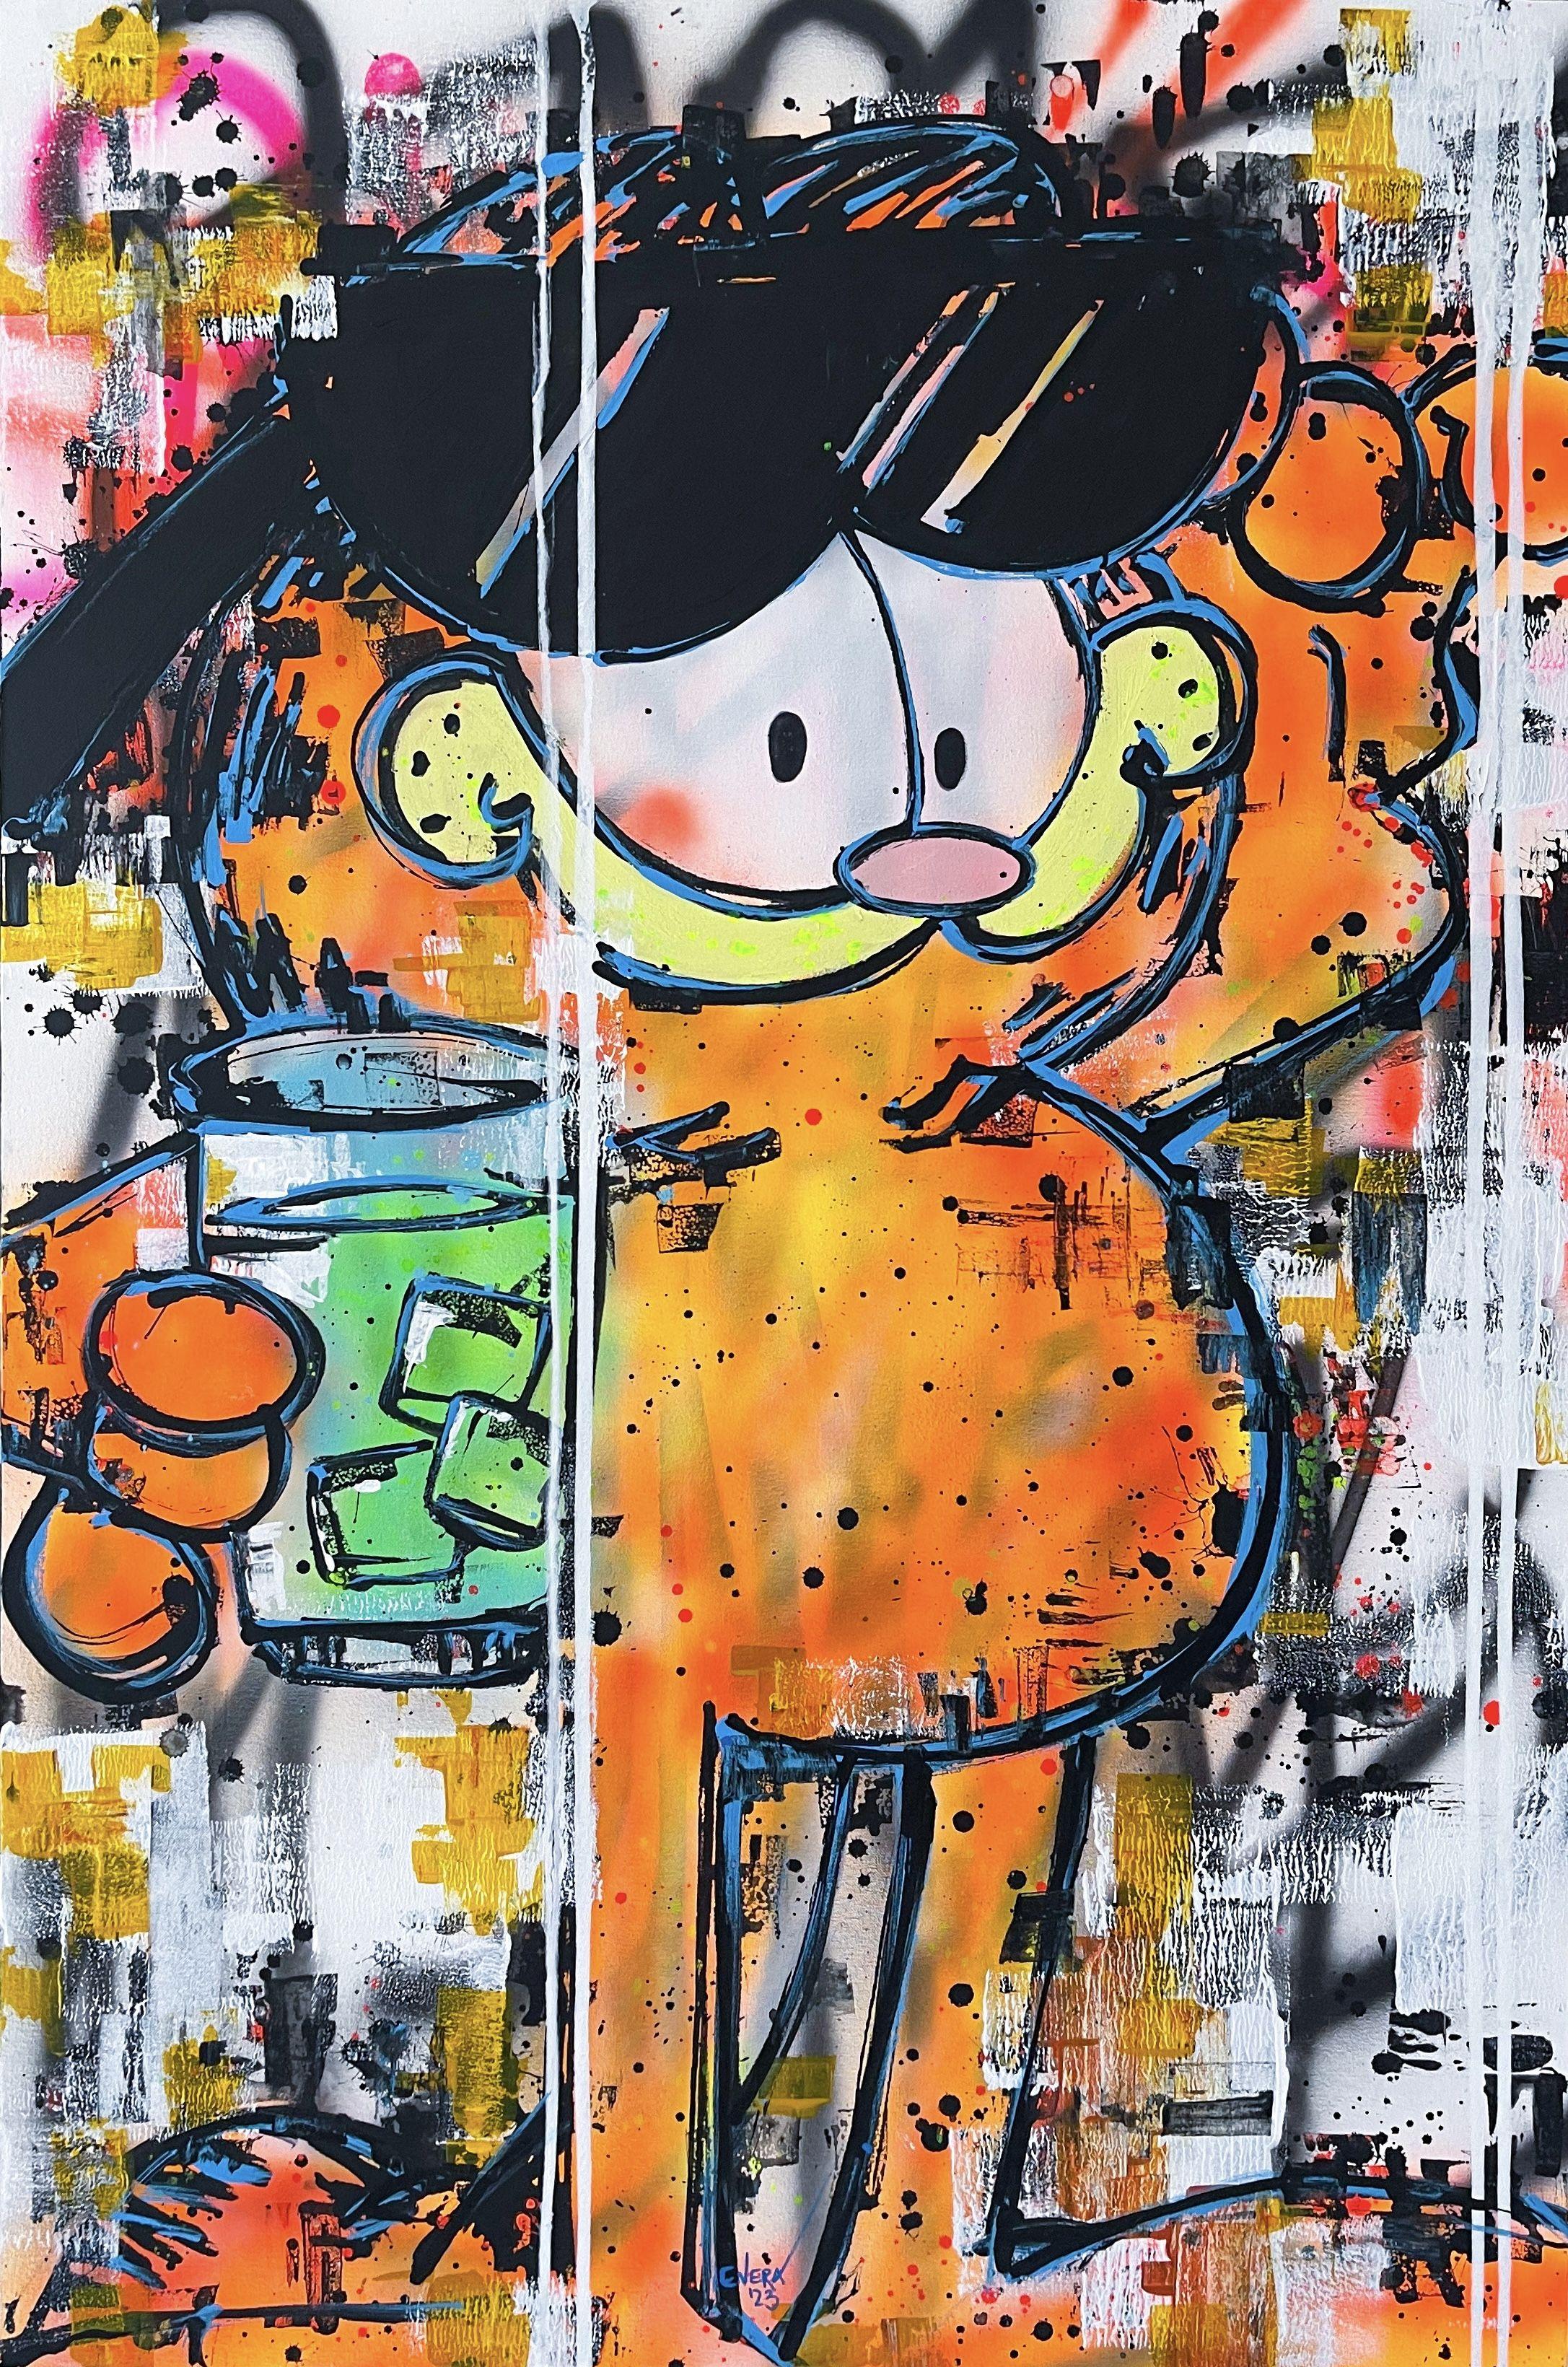 This series of artworks blends elements of PopArt and Street Art to depict contemporary, everyday life in a colorful and dynamic way. The pieces feature modern characters that have become a part of our lives, each rendered with bold, graphic shapes